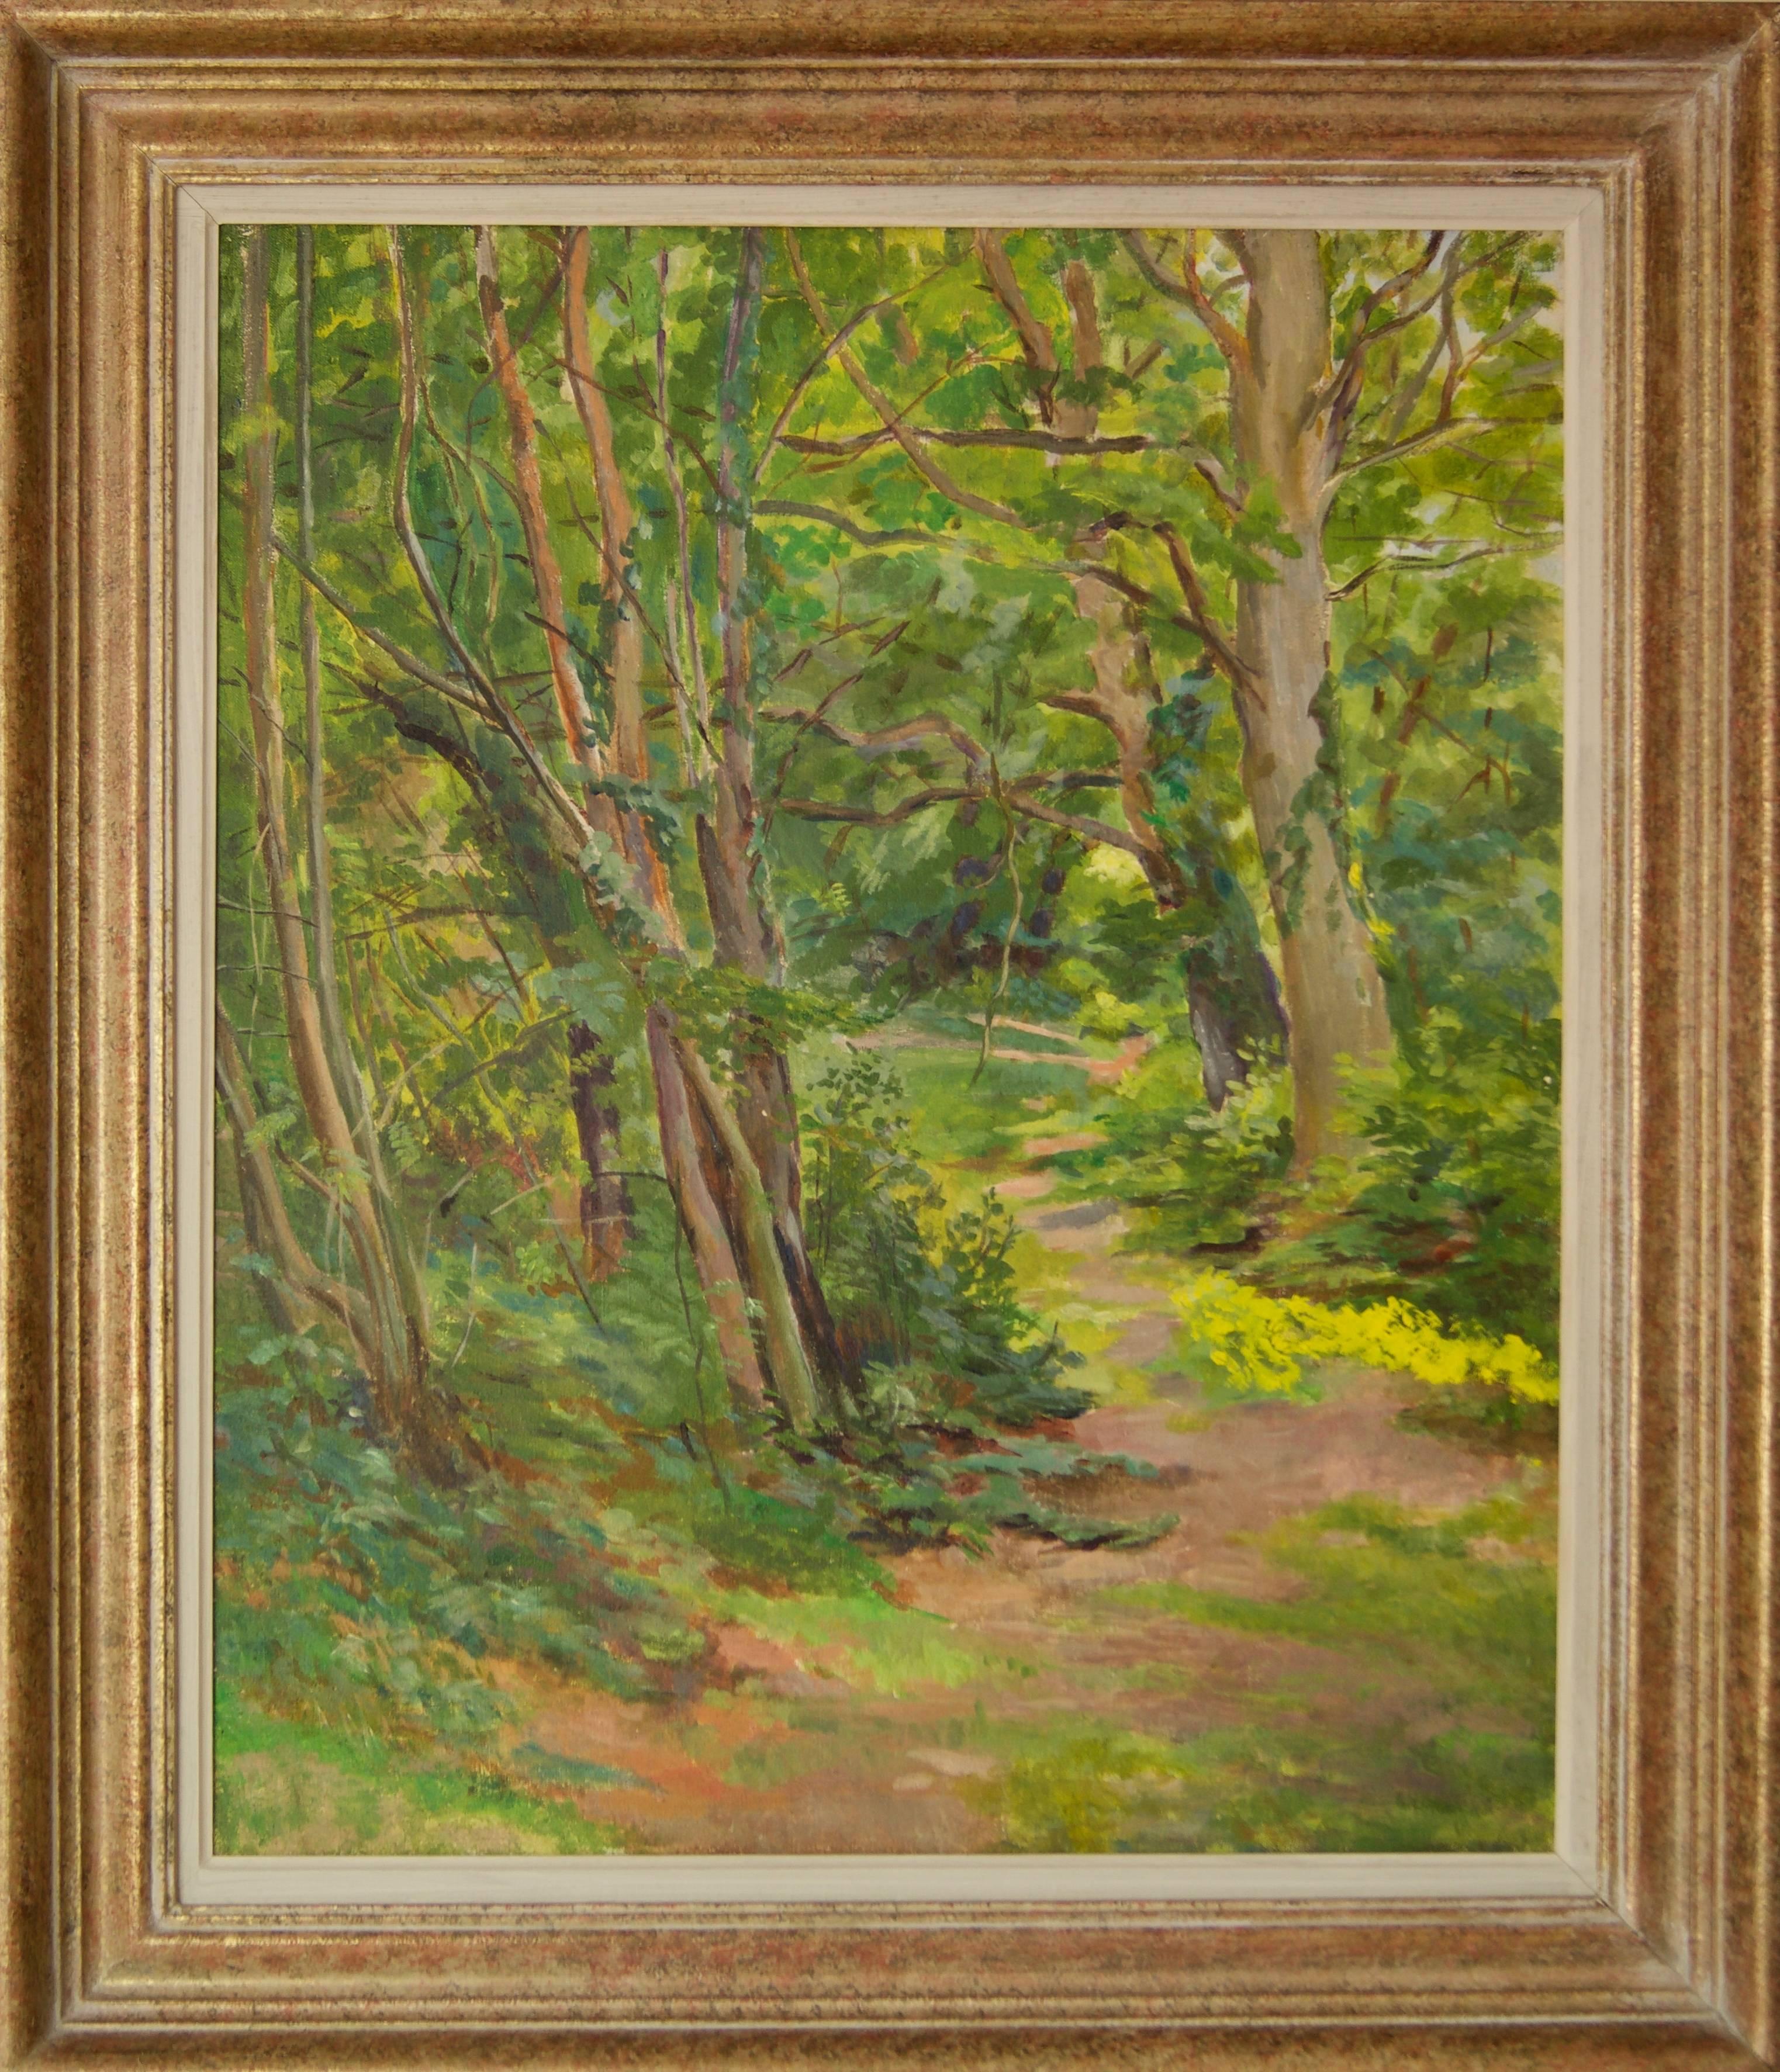 Spring Wooden Landscape - Dorothy King (1907-1990)

Dorothy King was born and lived in London in 1907. She studied at the Hornsey School of Art under JC Moody, then briefly at the Slade School of Fine Art with Randolph Schwabe. She took up painting